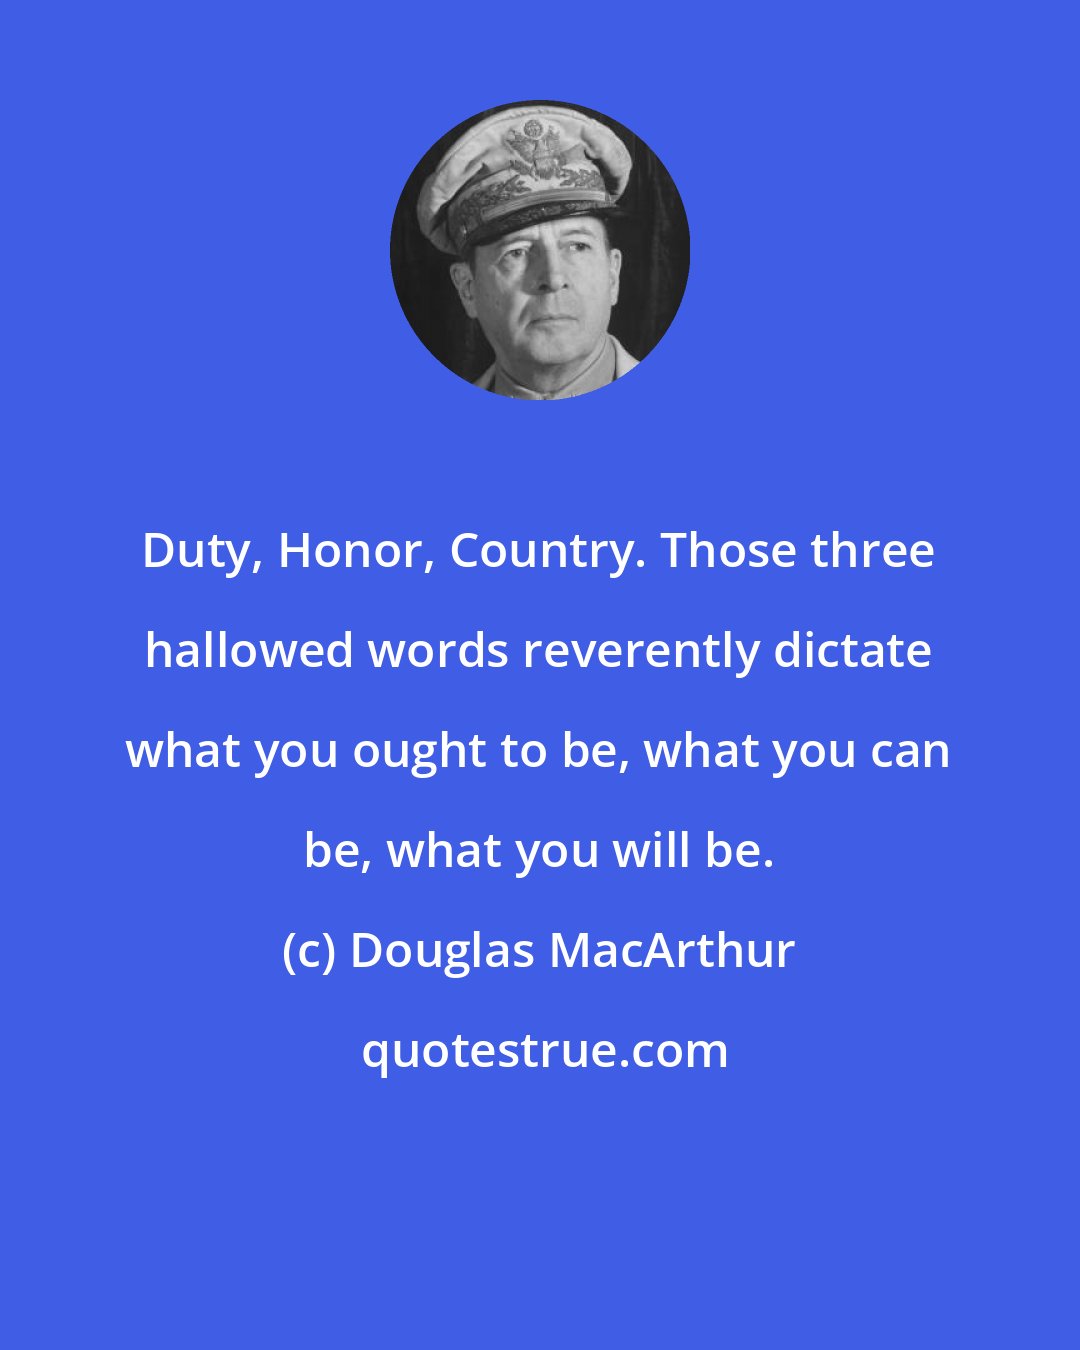 Douglas MacArthur: Duty, Honor, Country. Those three hallowed words reverently dictate what you ought to be, what you can be, what you will be.